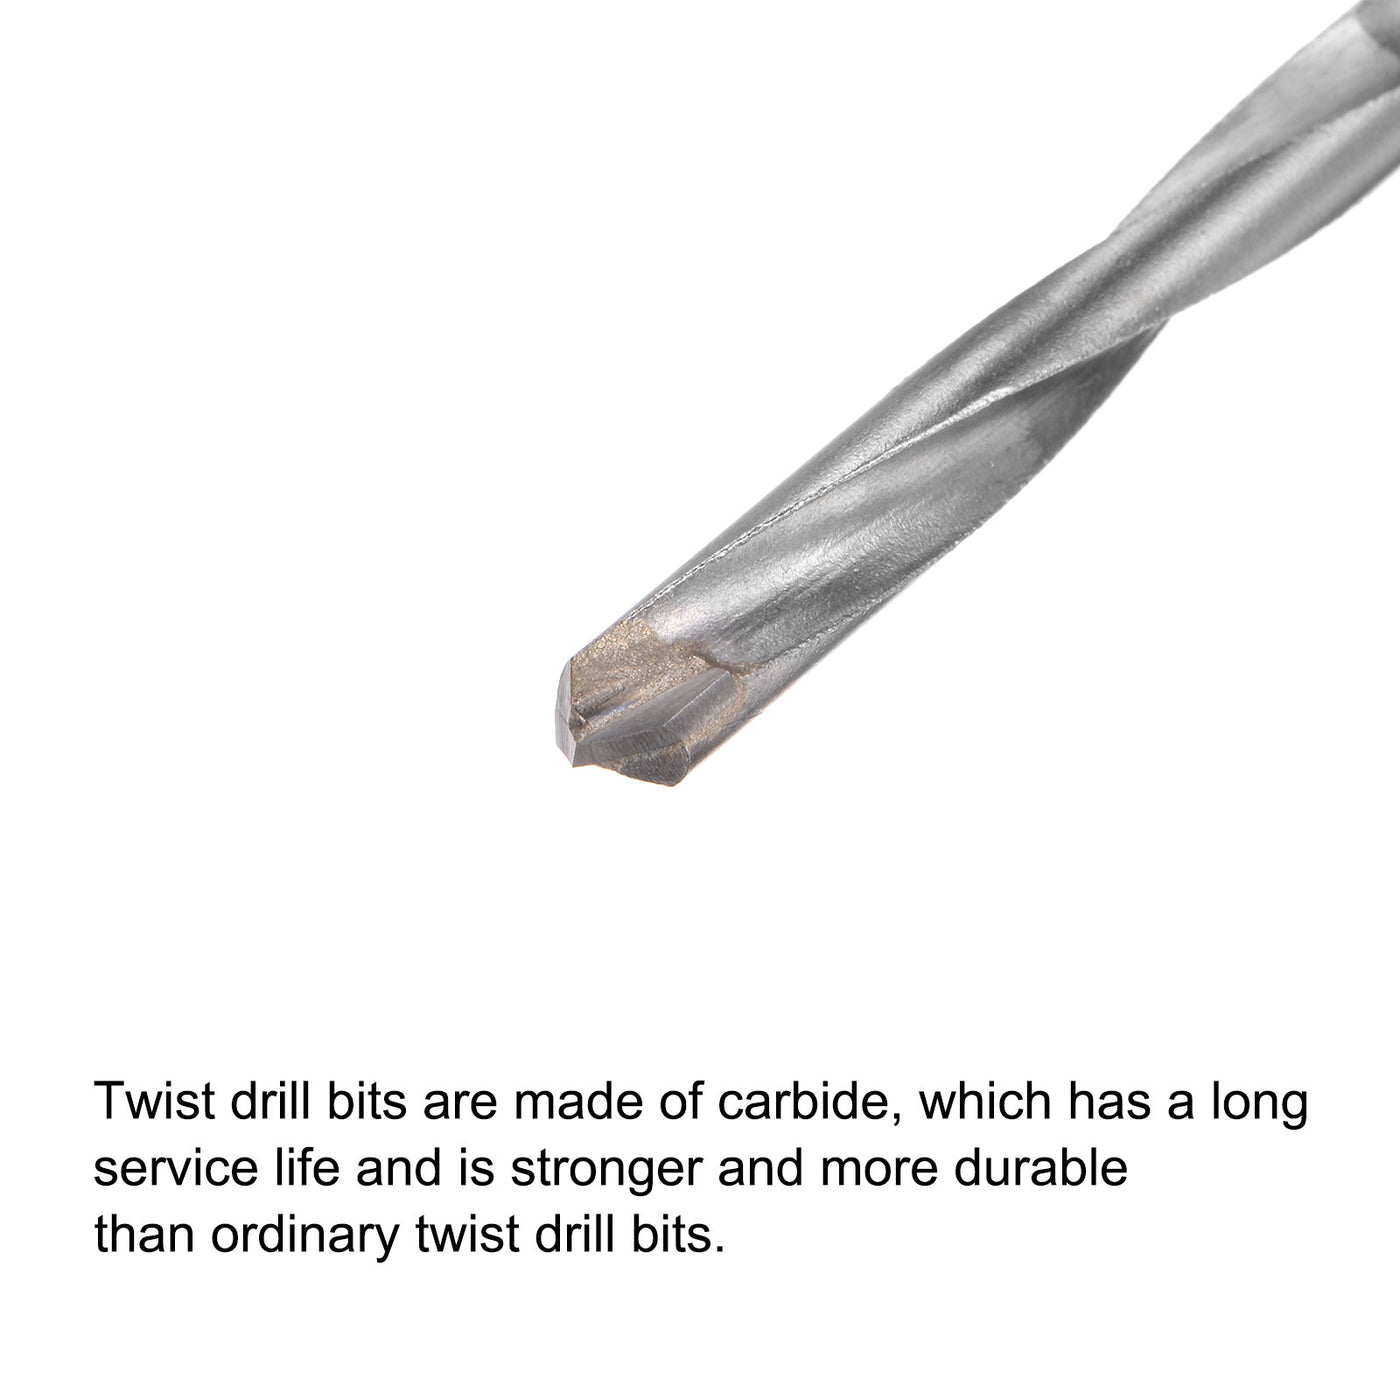 uxcell Uxcell 6mm Cutting Dia Round Shank Cemented Carbide Twist Drill Bit, 100mm Length 2 Pcs